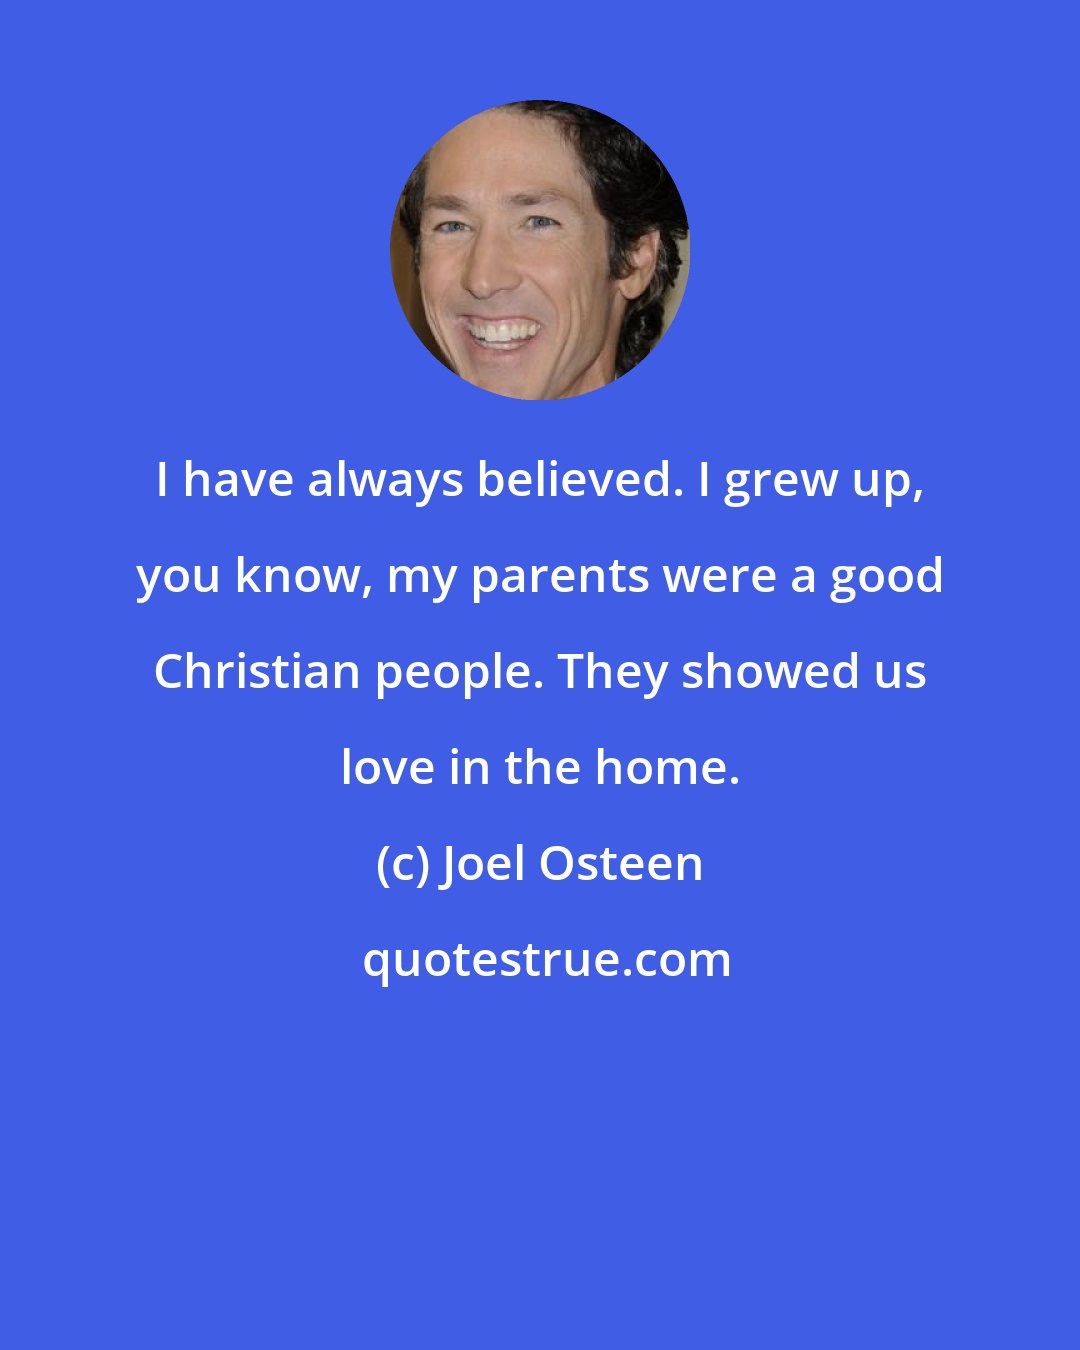 Joel Osteen: I have always believed. I grew up, you know, my parents were a good Christian people. They showed us love in the home.